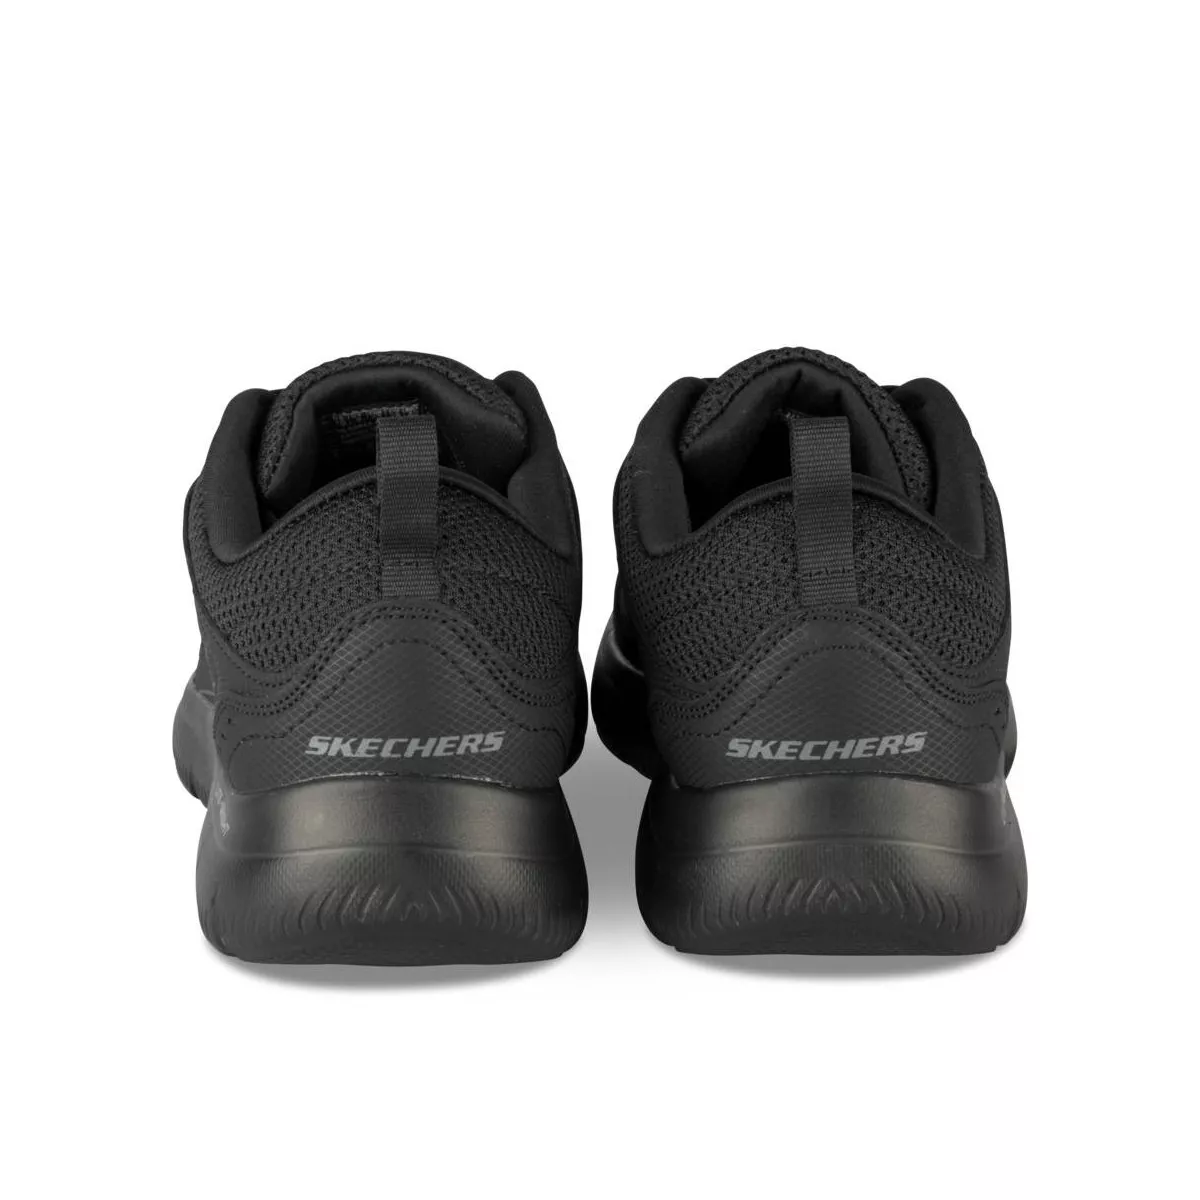 skechers black athletic shoes - OFF-55% >Free Delivery